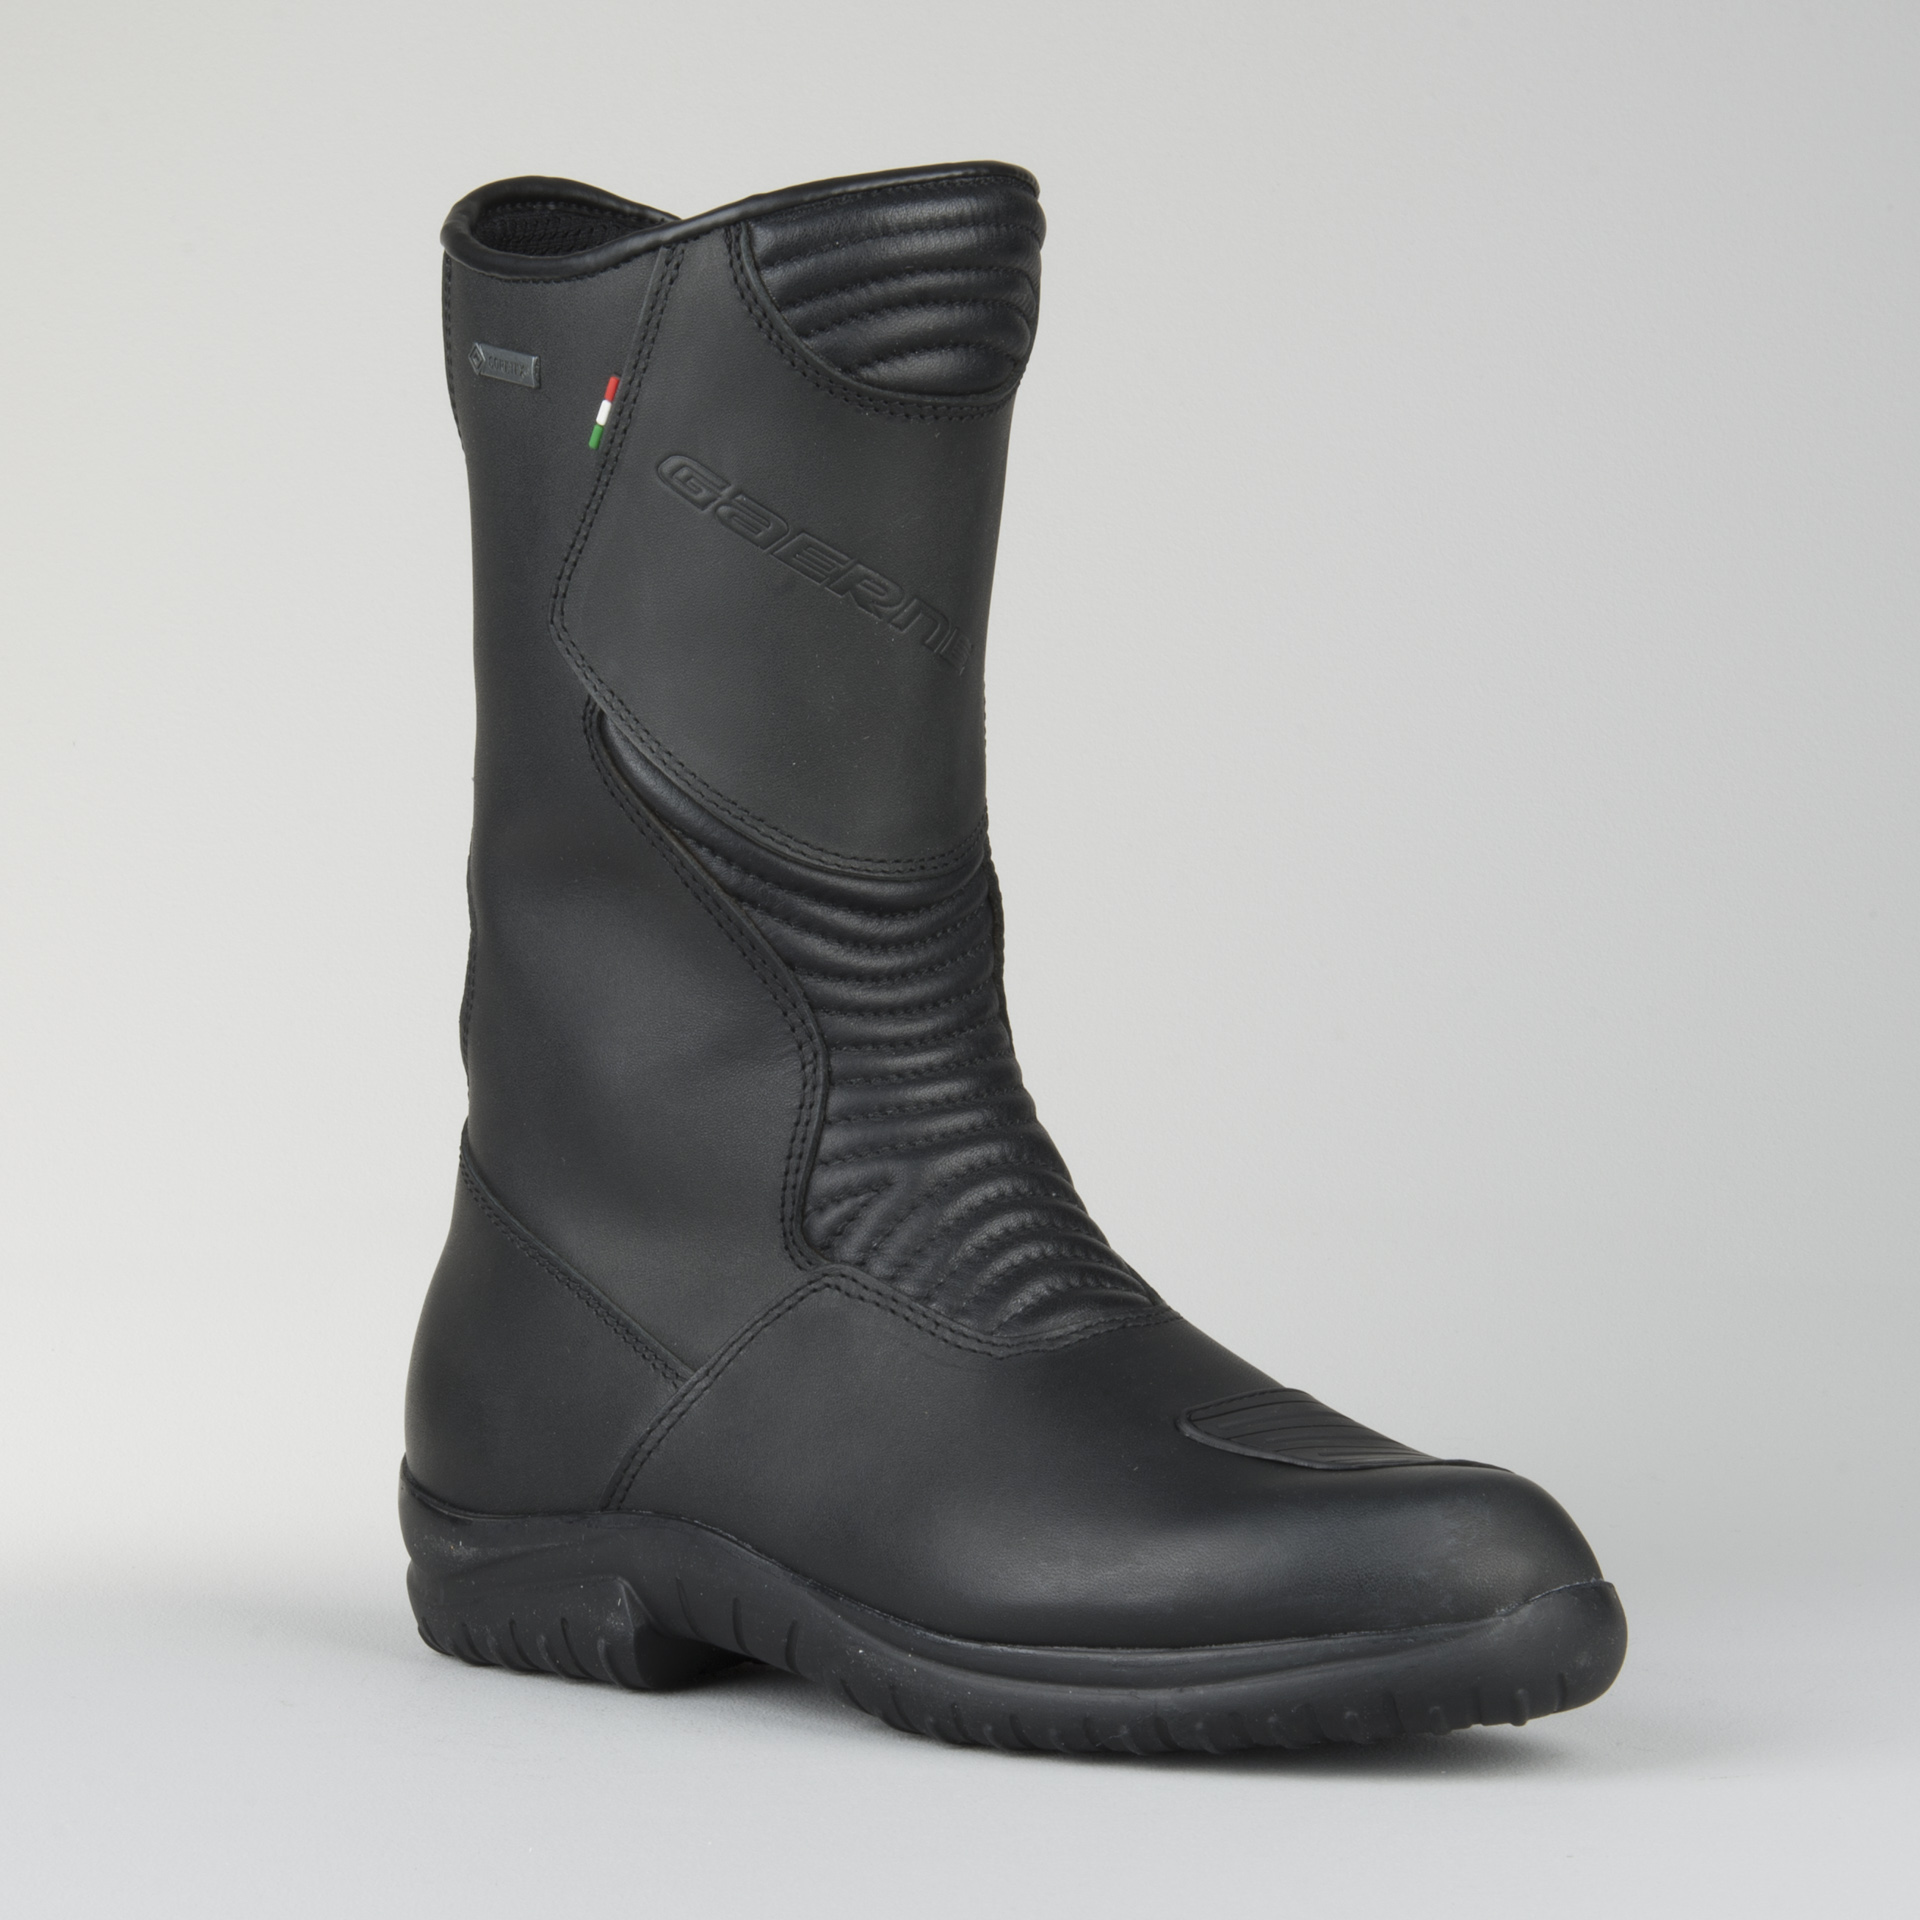 gaerne women's motorcycle boots